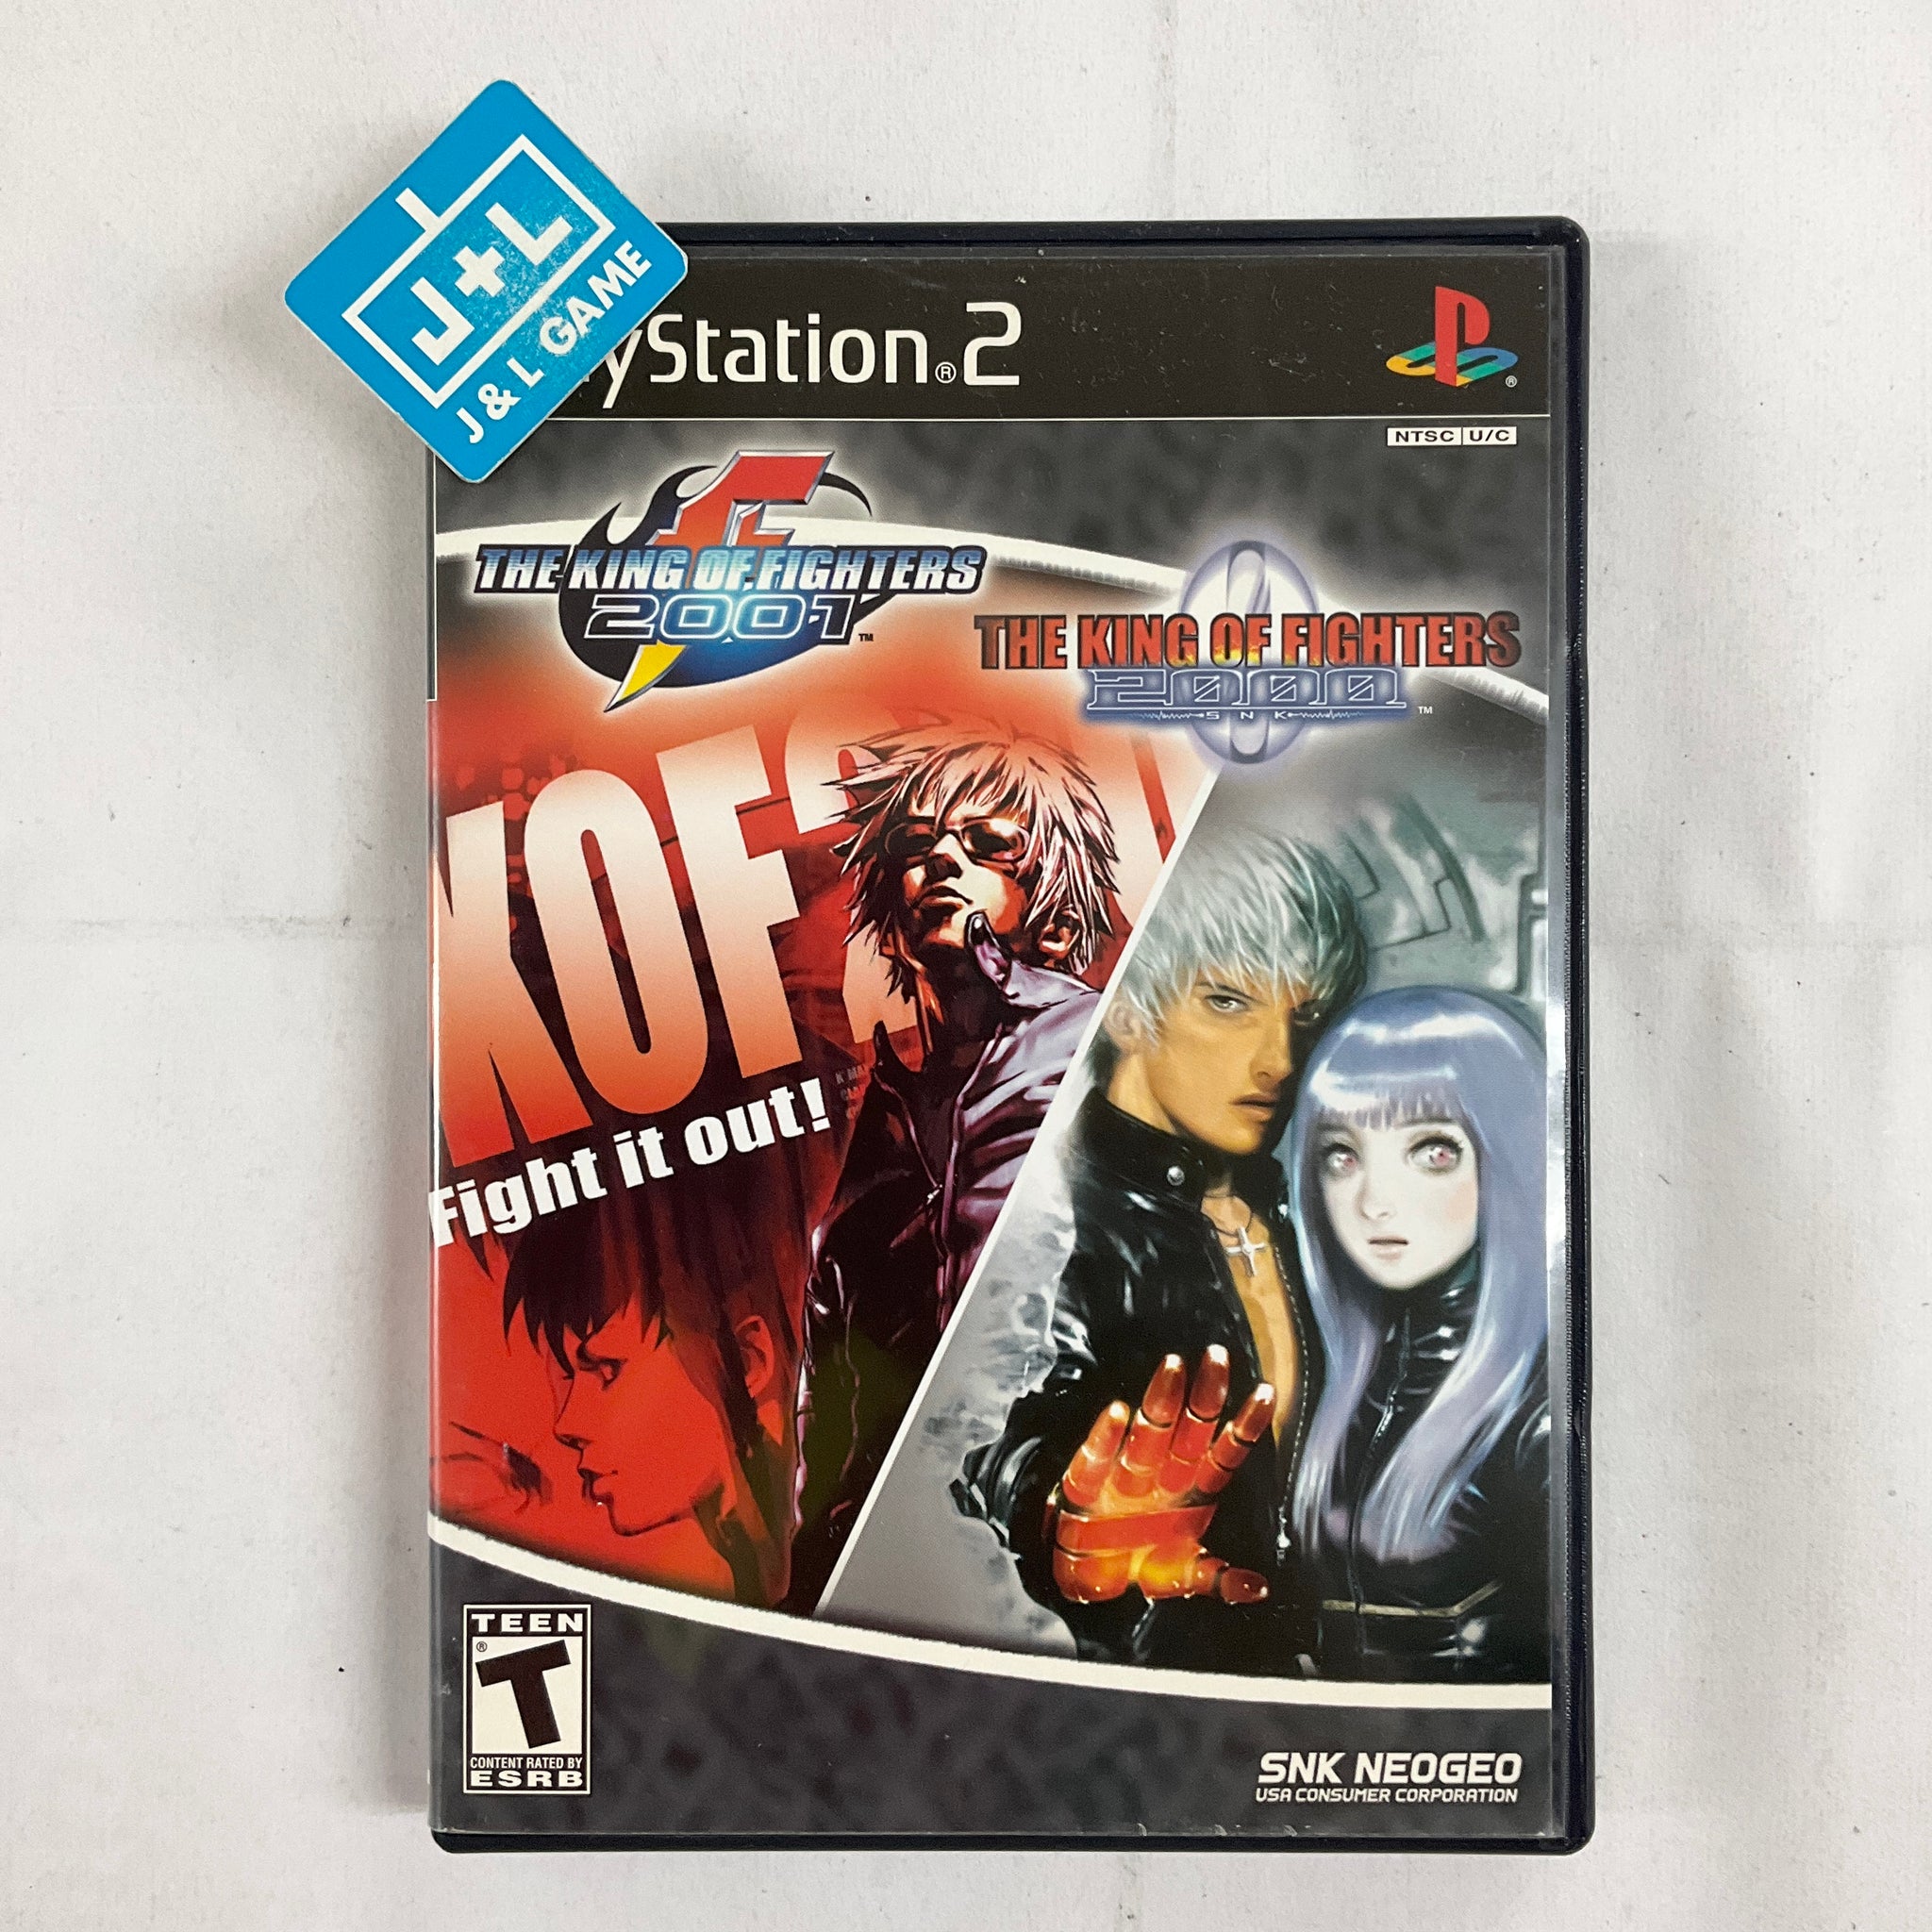 The King of Fighters Nests Edition NEOGEO Online Collection PS2 PlayStation  2